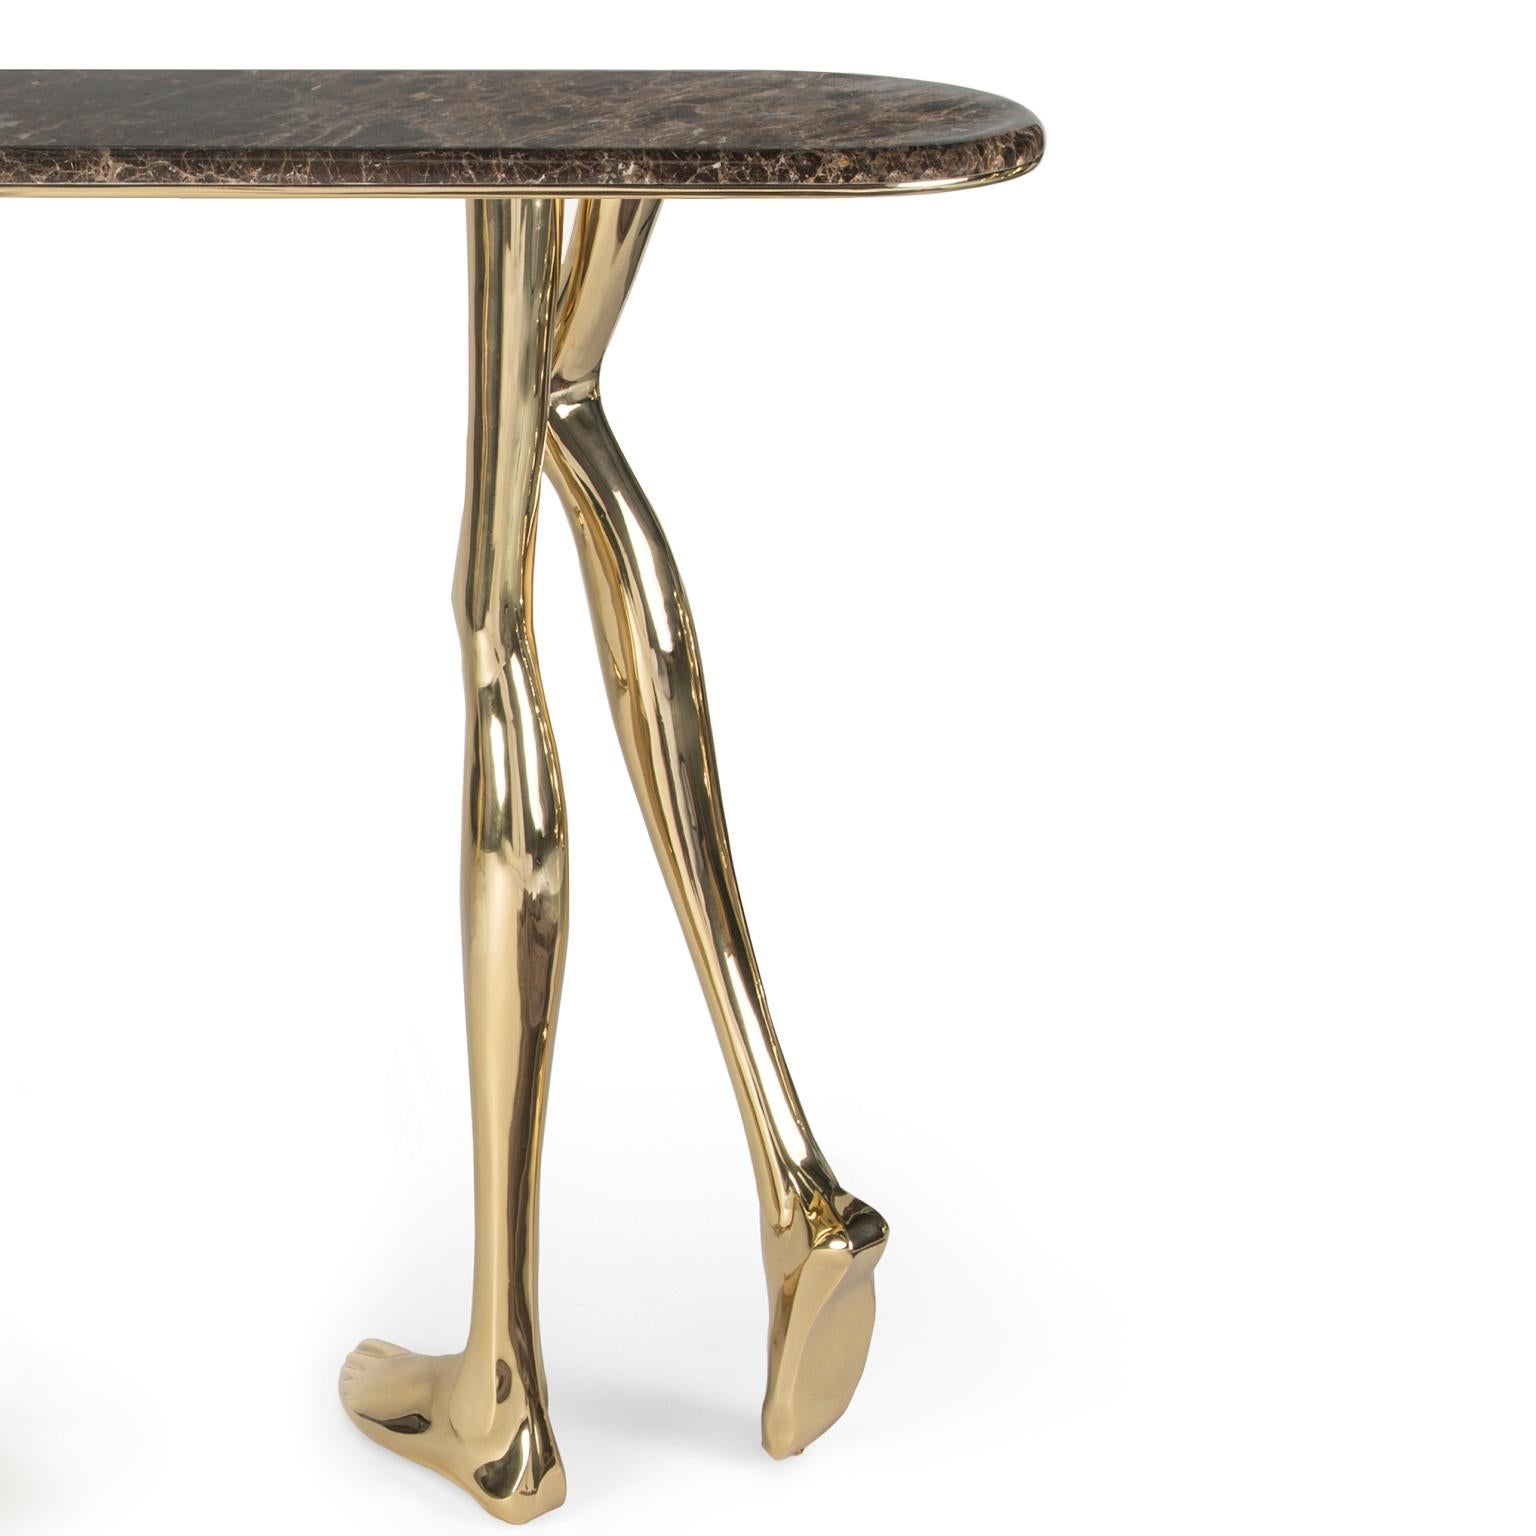 Portuguese Contemporary Sculptural Monroe Console Table, Polished Brass and Brown Marble For Sale